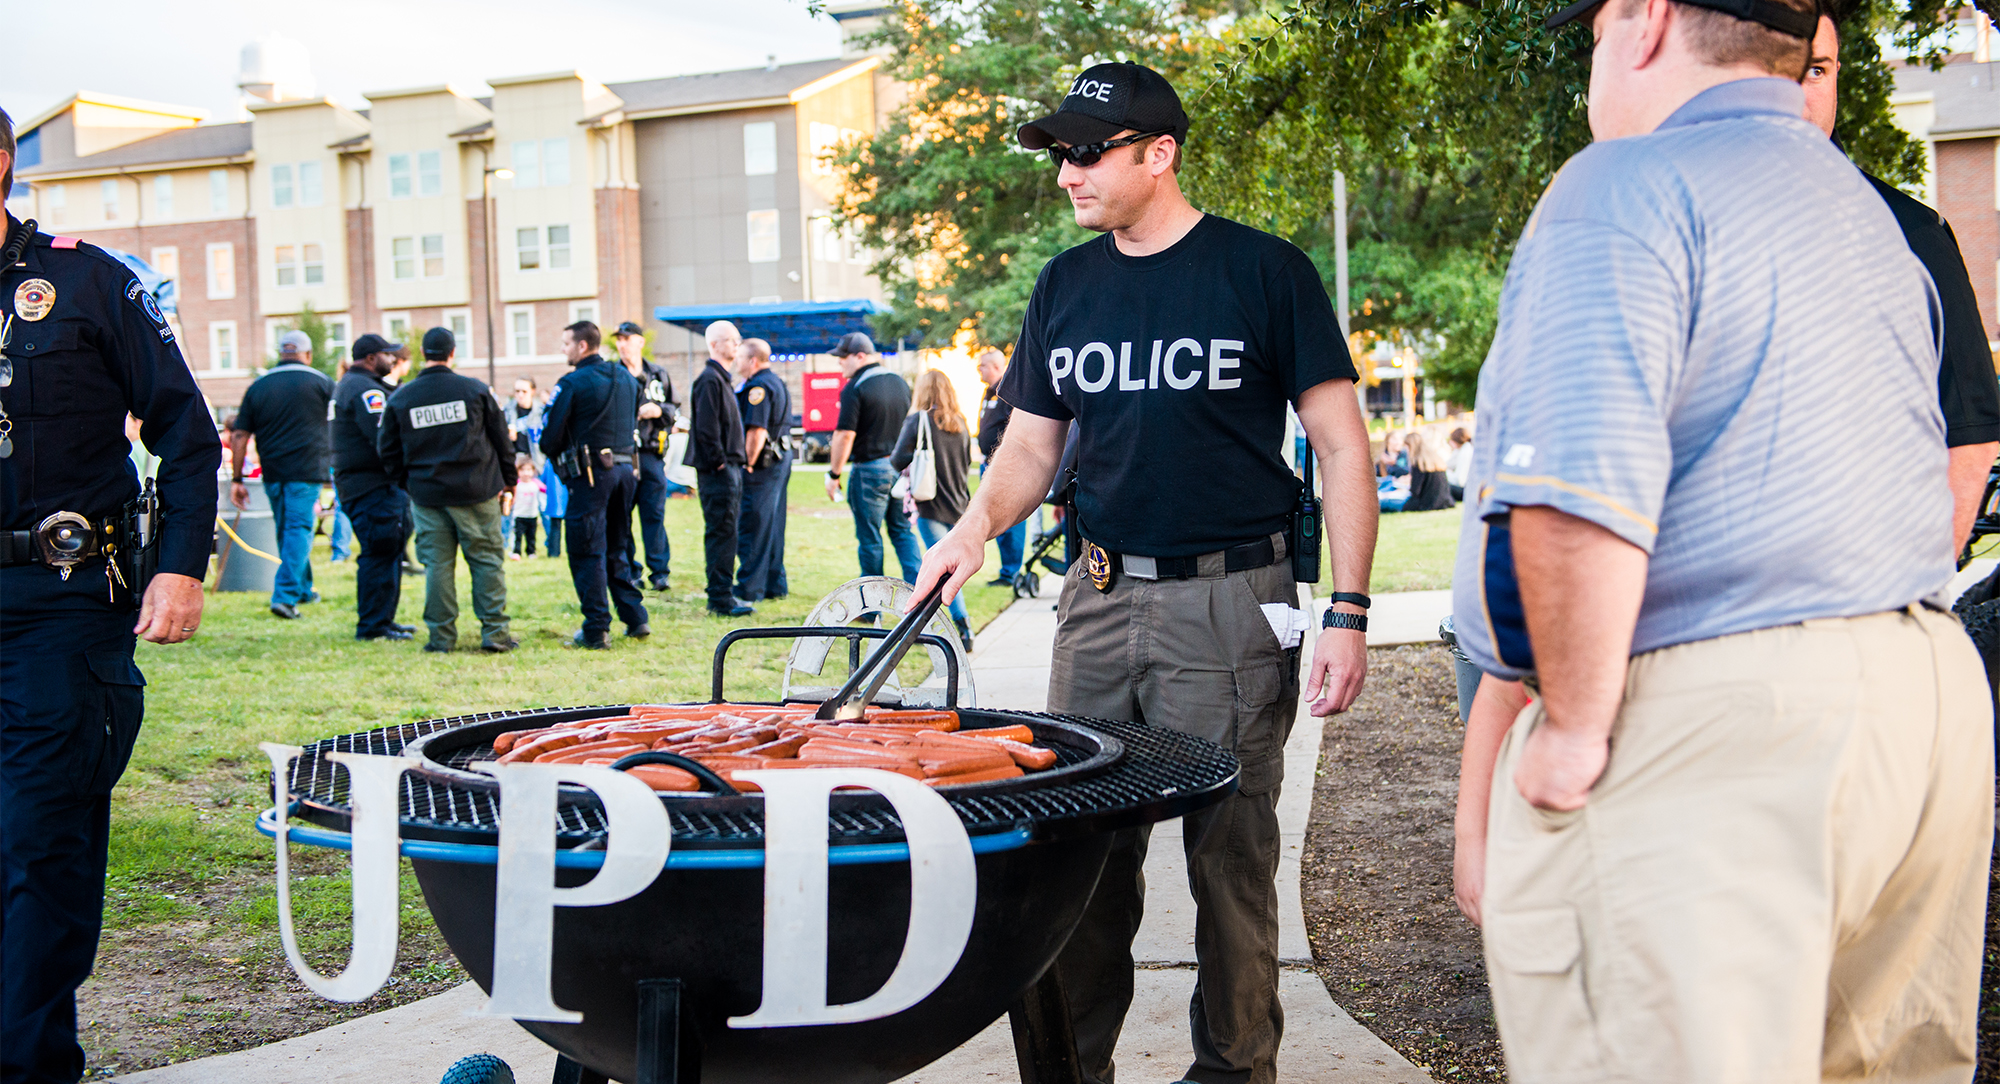 Police officer grilling hot dogs at a community engagement event.